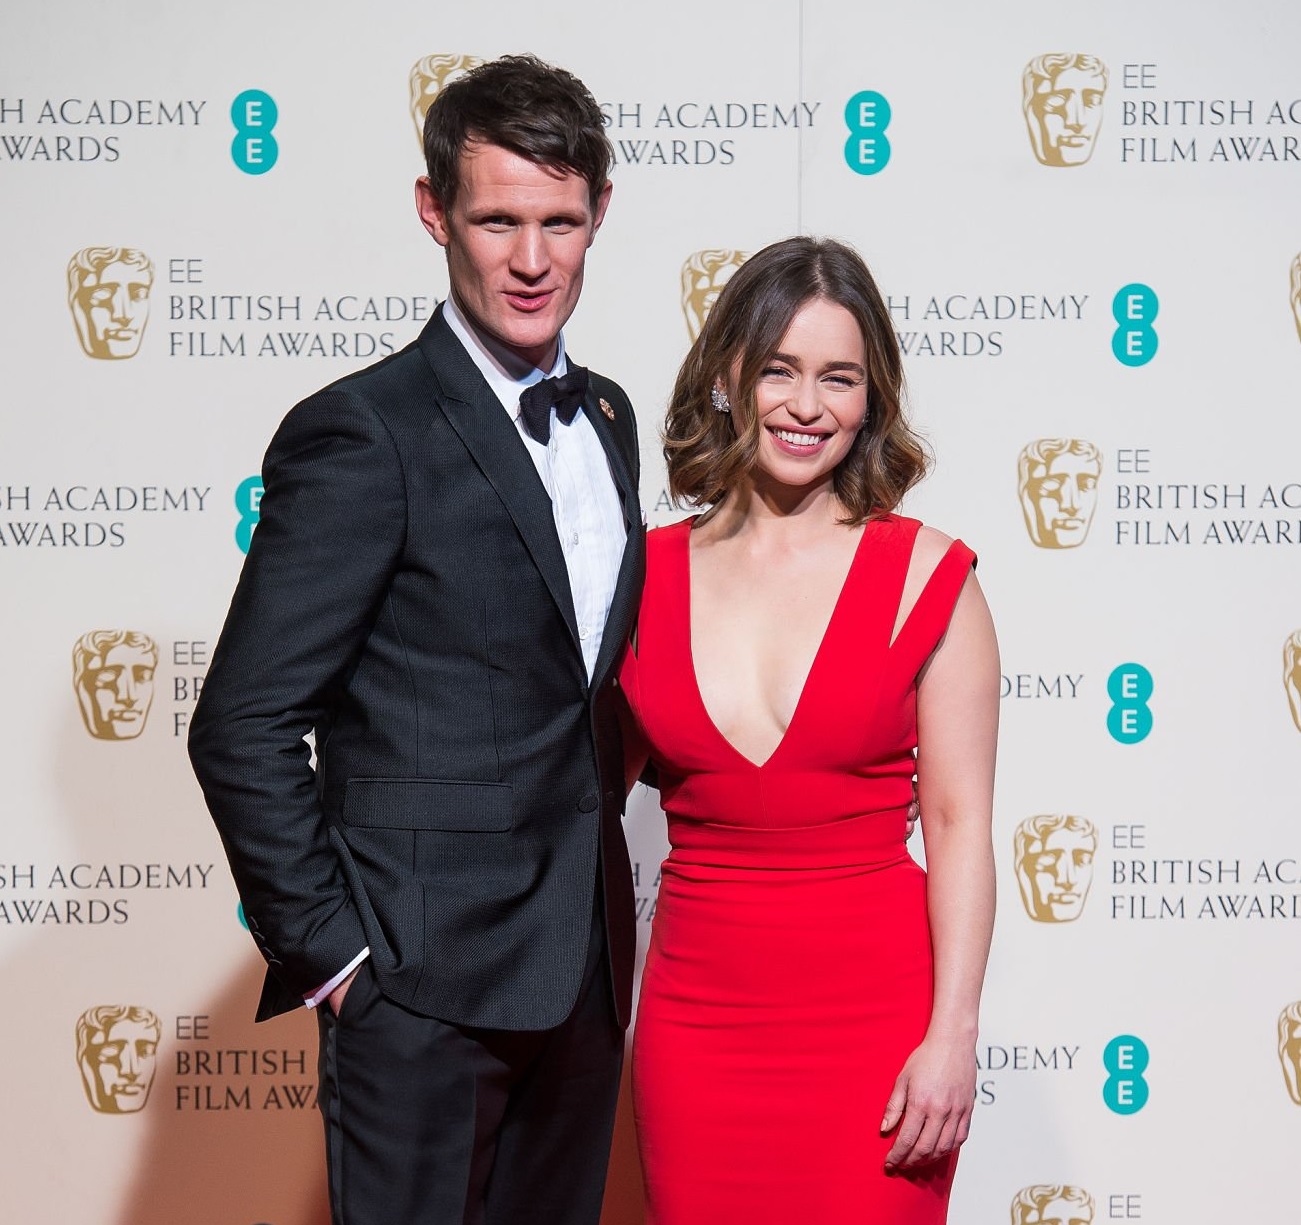  Emilia Clarke and Matt Smith pose in the winners room at the EE British Academy Film Awards in 2016.